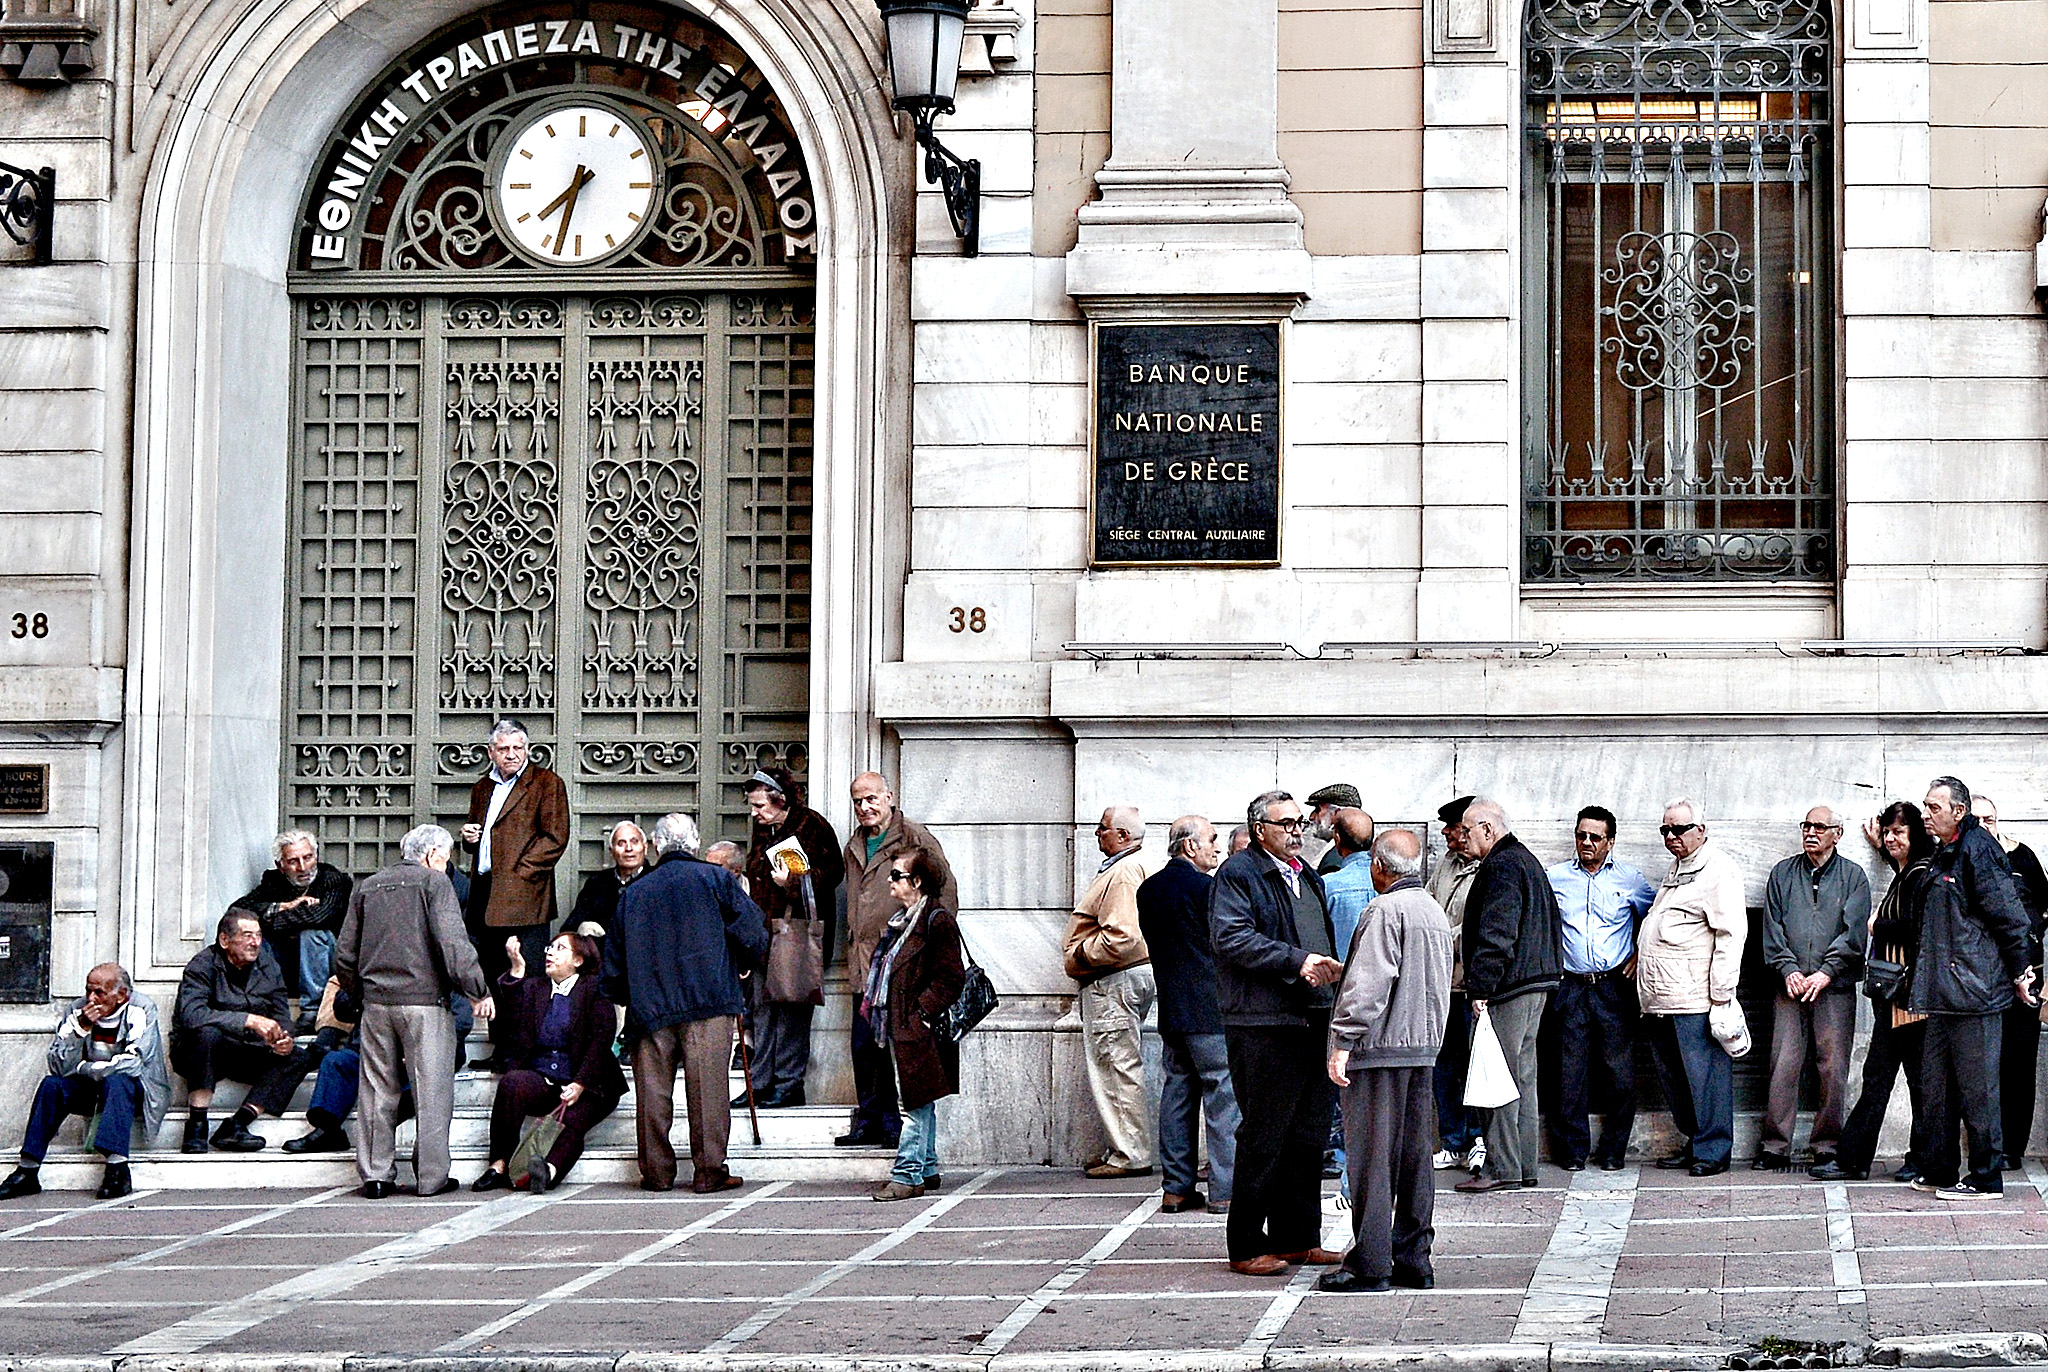 Pensioners wait outside the National Bank of Greece to get their monthly pensions on April 29, 2015. Greece has been trying to negotiate a deal that would unlock 7.2 billion euros (7.8 billion USD) in remaining EU-International Monetary Fund bailout money that the debt-ridden Mediterranean country needs to avoid default and a possible exit from the euro. So far, Athens has resisted new pension caps, the elimination of some VAT exemptions and no longer wants to use privatisation proceeds to repay state debt